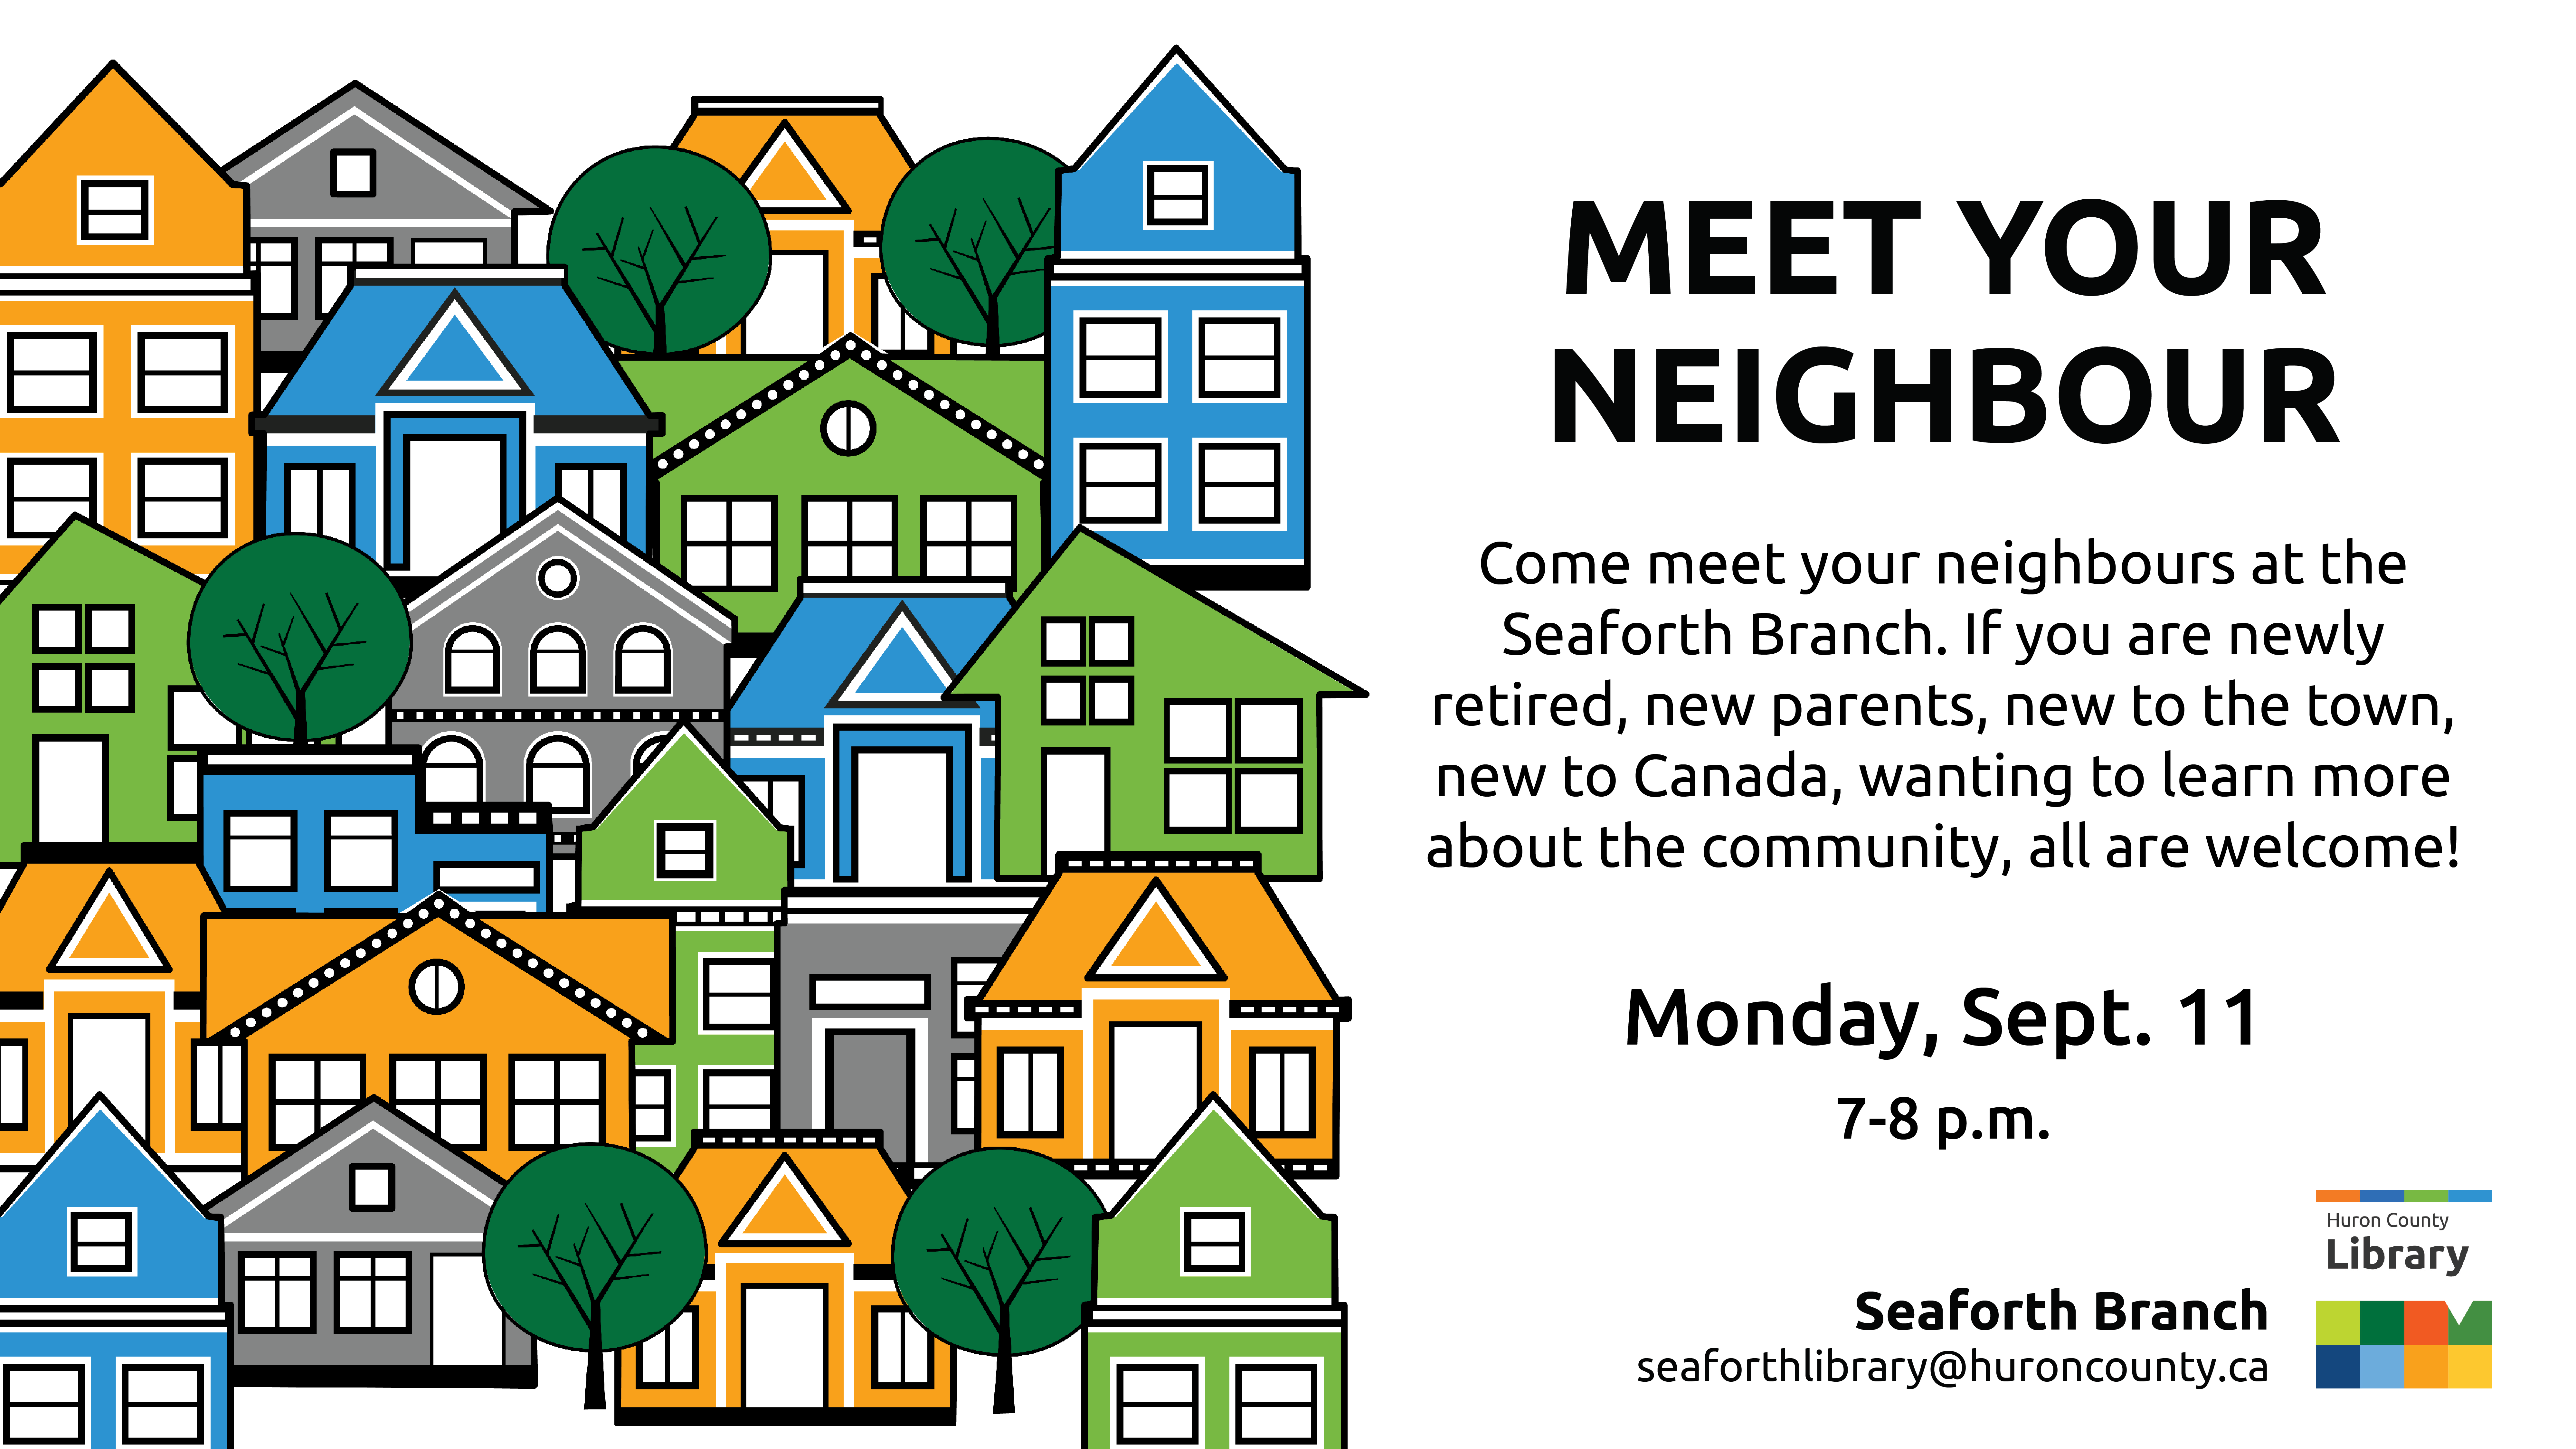 Illustration of a neighbourhood of homes with text promoting Meet Your Neighbour at Seaforth Branch